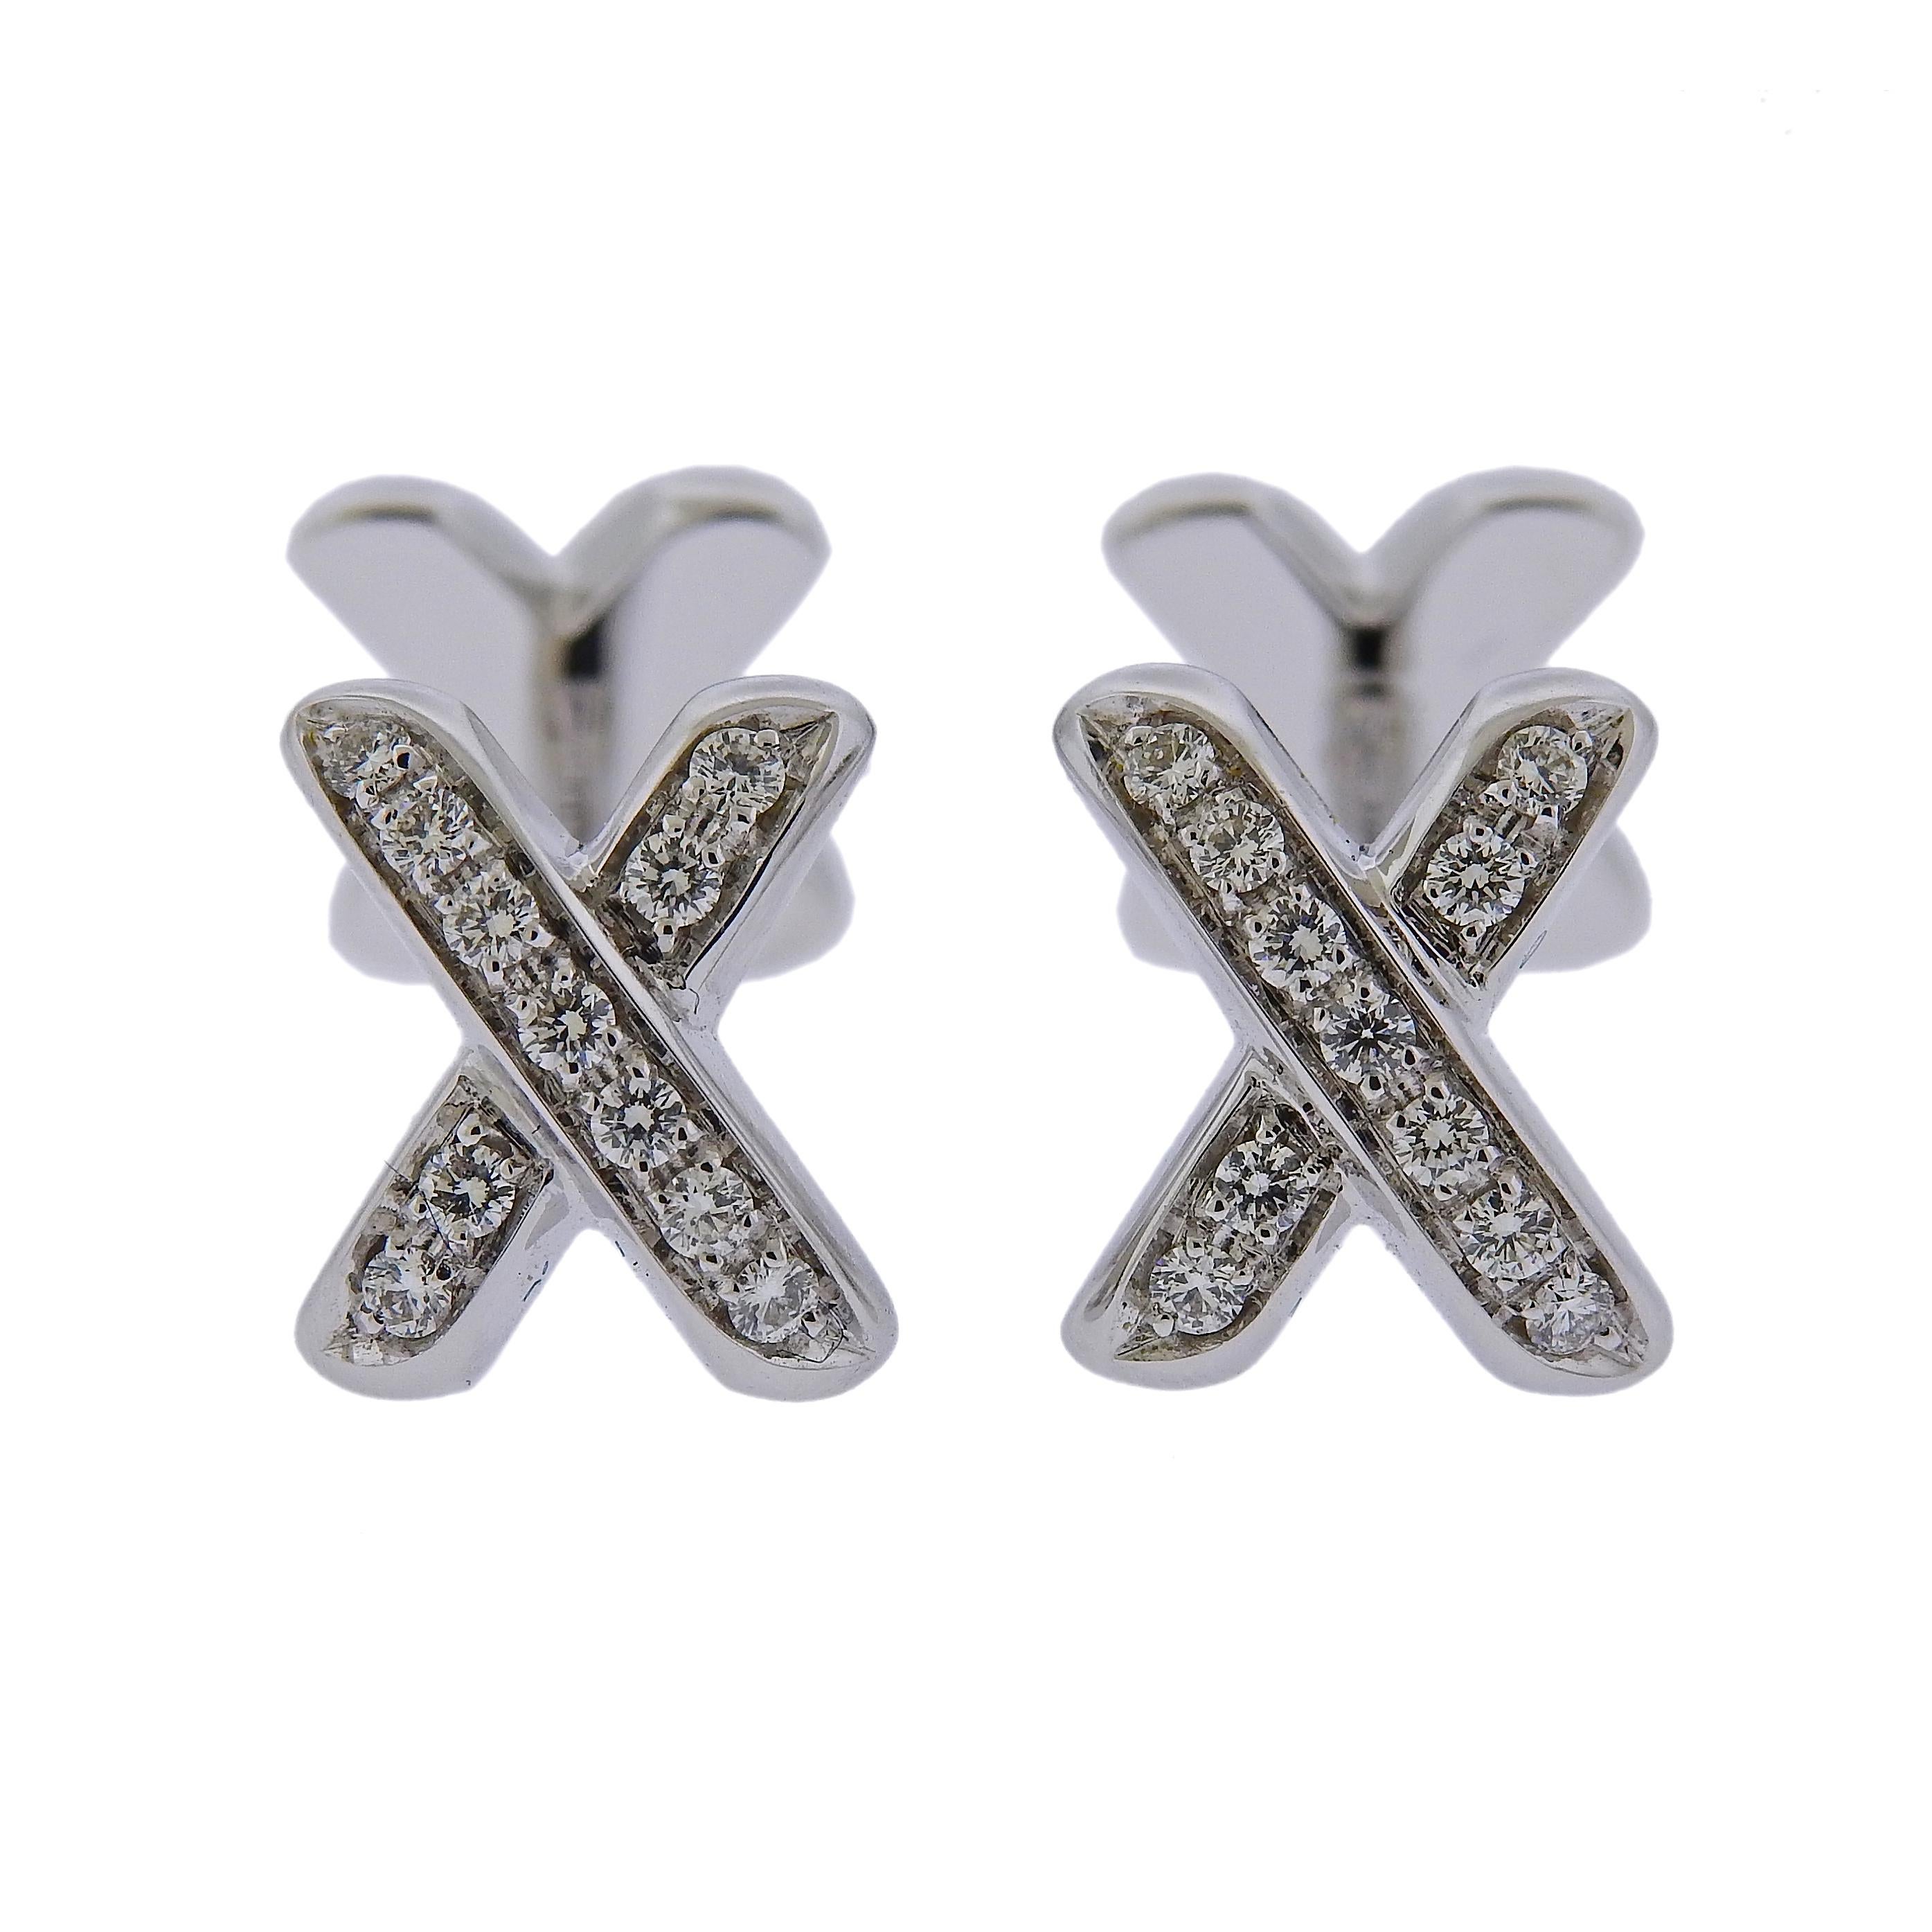 Pair of classic X cufflinks, crafted by Tiffany & Co in 18k white gold, adorned with approx. 0.36ctw in G/VS diamonds. Cufflink top - 14mm x 10mm. Weight: 14.1 grams. Marked: T & Co, 750, Italy. 